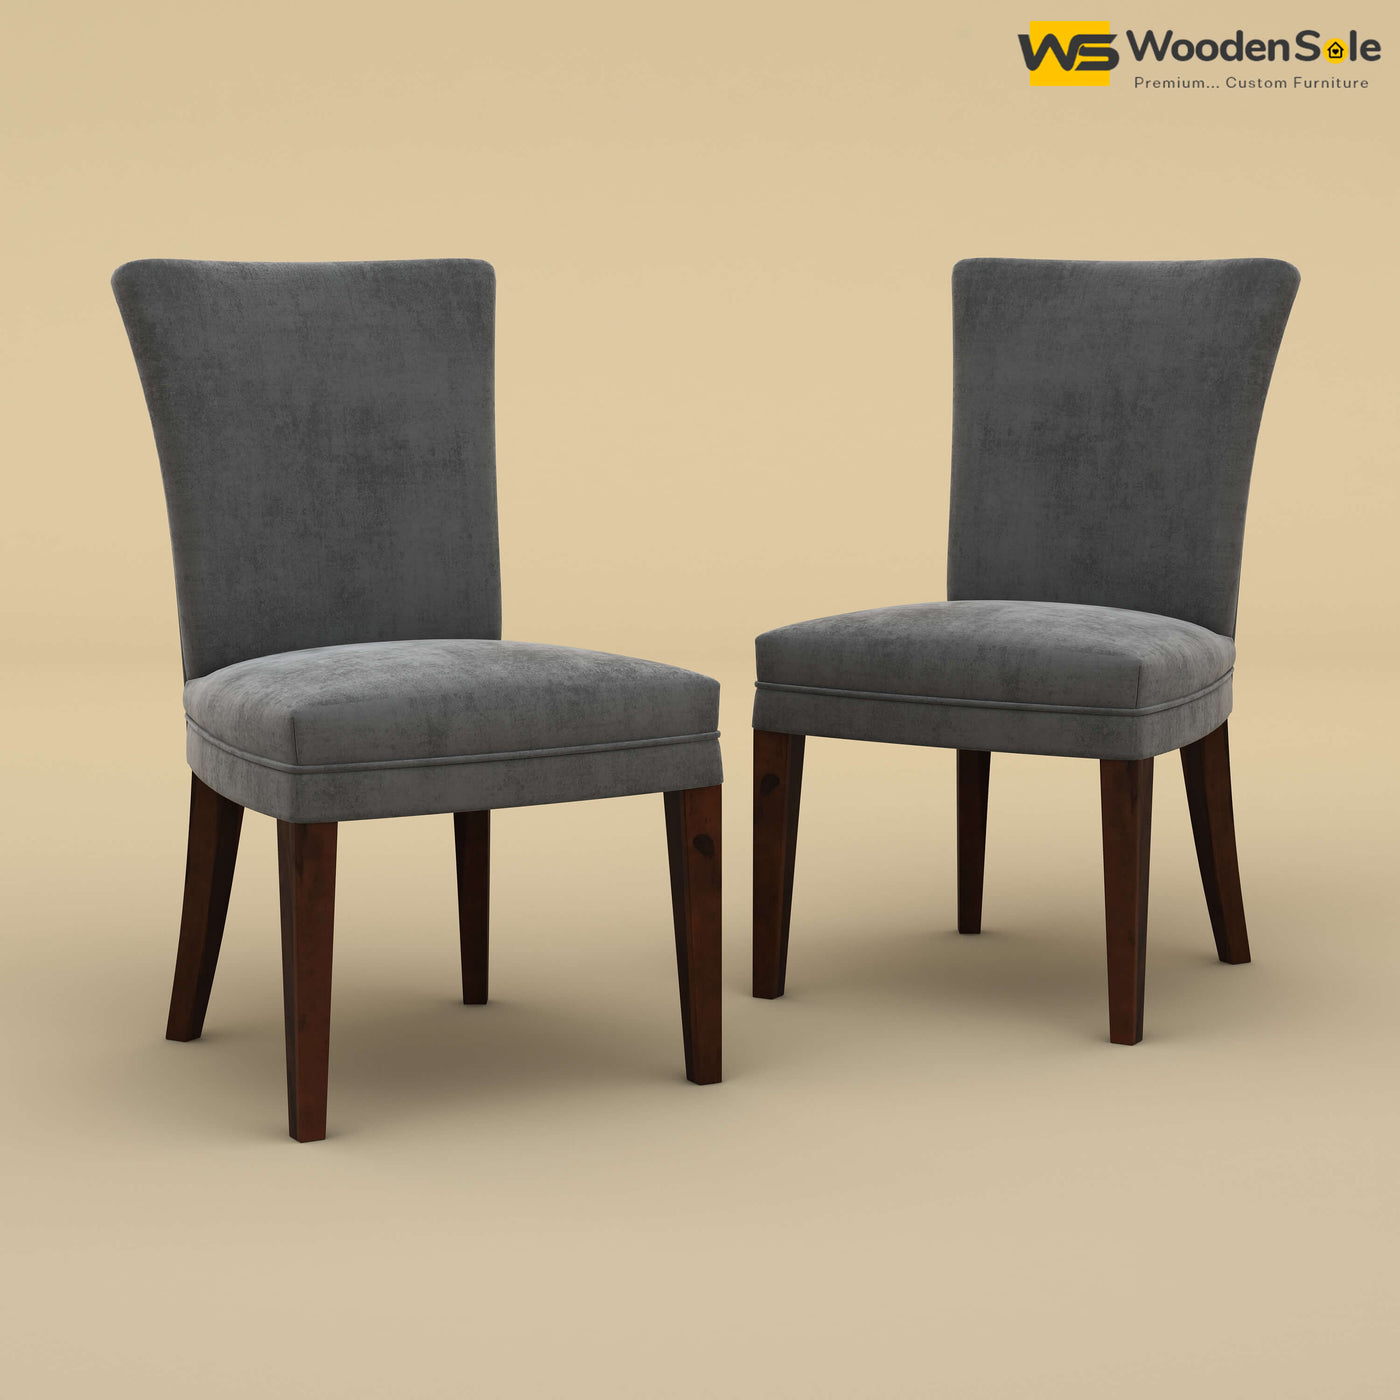 Bently Dining Chairs - Set of 2 (Velvet, Charcoal Gray)